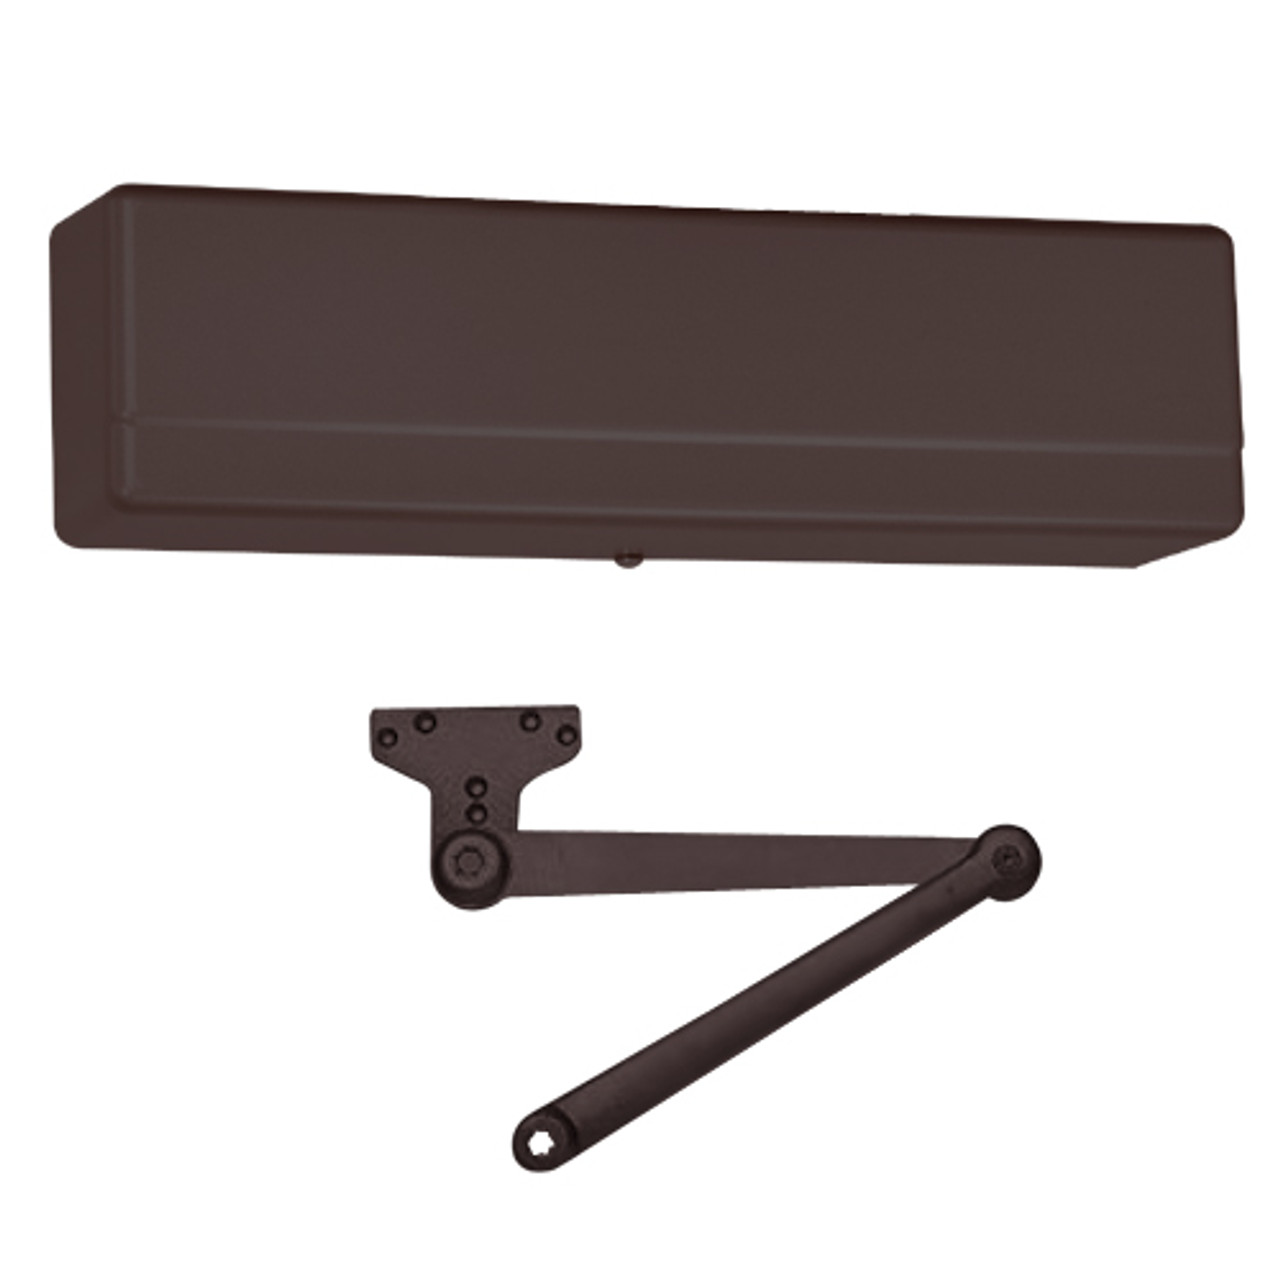 1431-PH10-10BE-LH Sargent 1431 Series Powerglide Door Closer with PH10 - Heavy Duty Friction Hold Open Parallel Arm in Dark Oxidized Satin Bronze